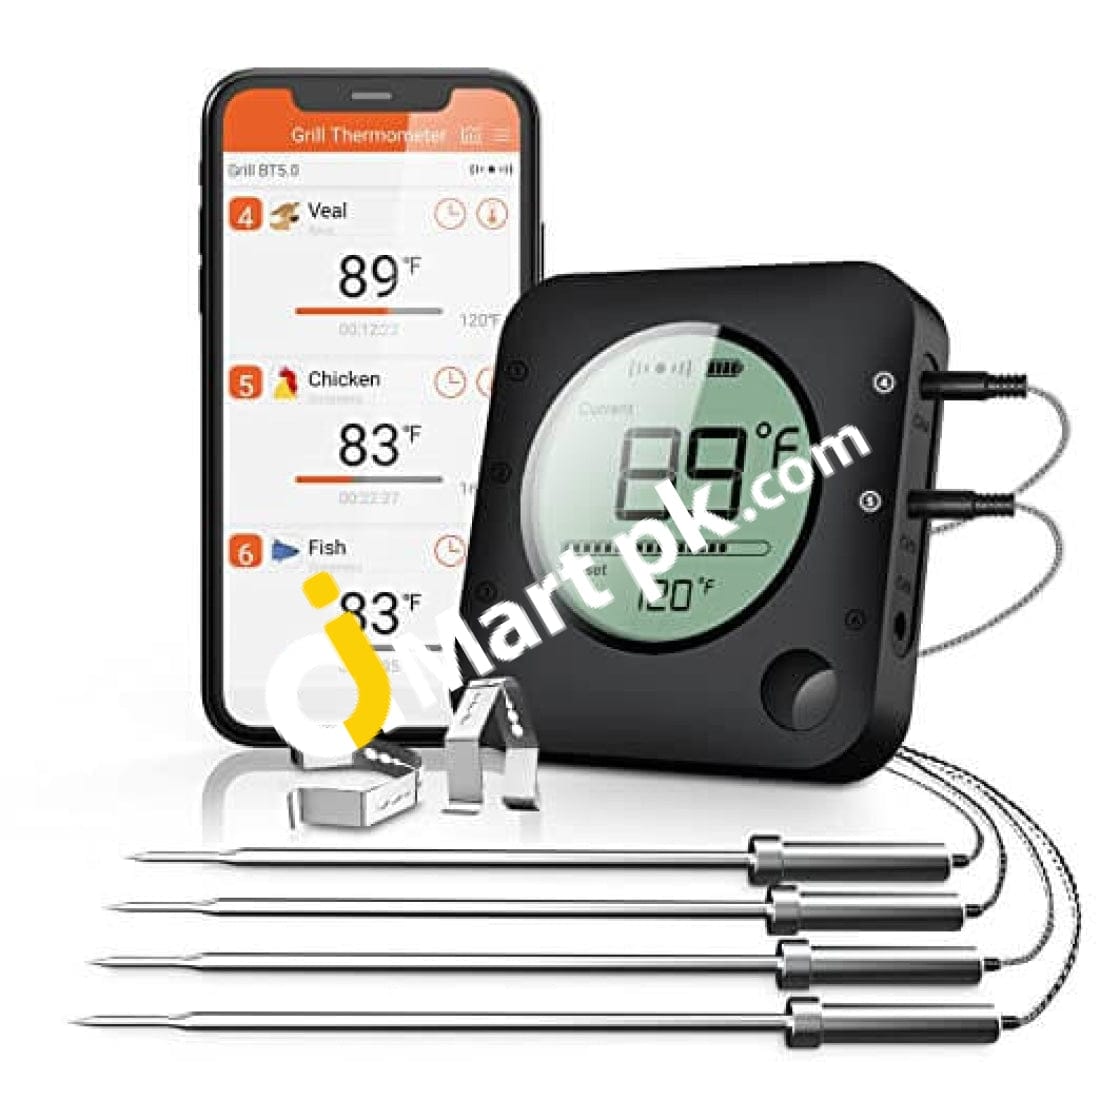 Govee Bluetooth Meat Thermometer, Smart Grill Thermometer, 196ft